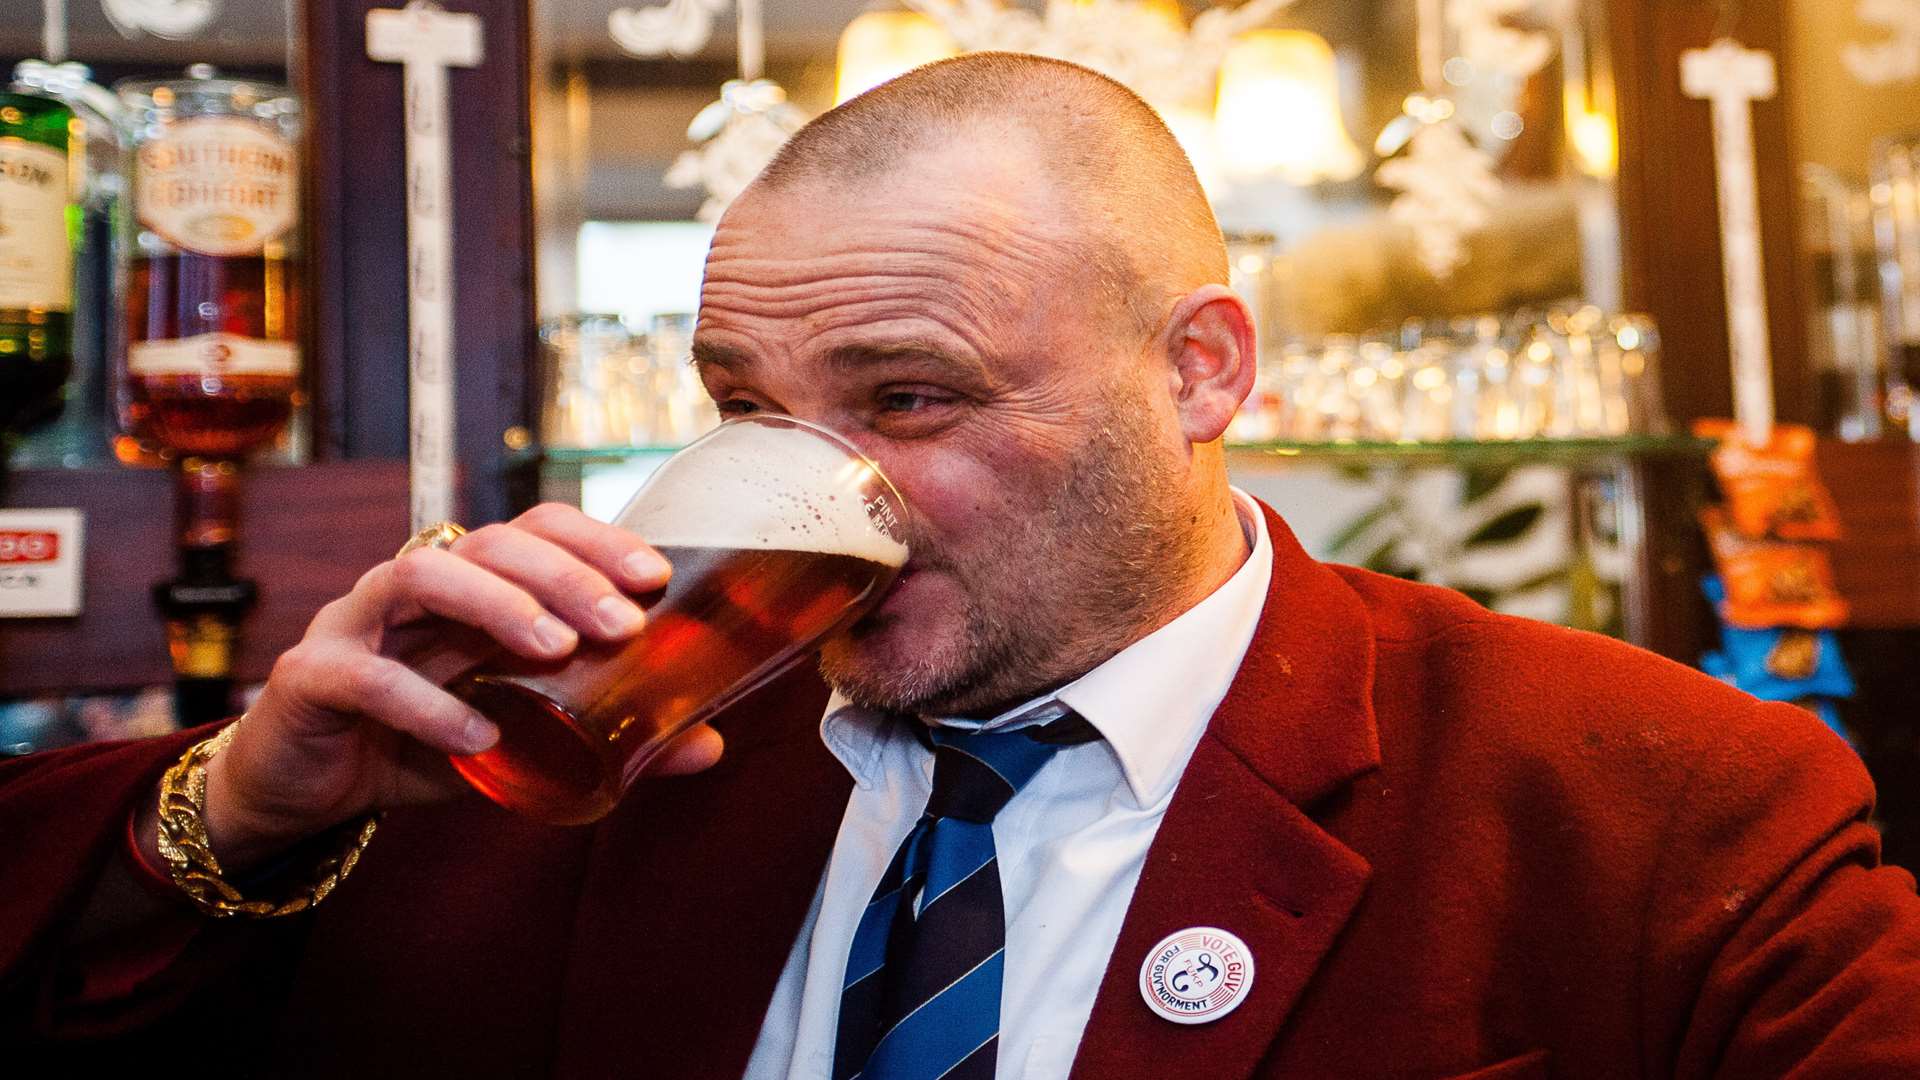 The Pub Landlord on the campaign trail